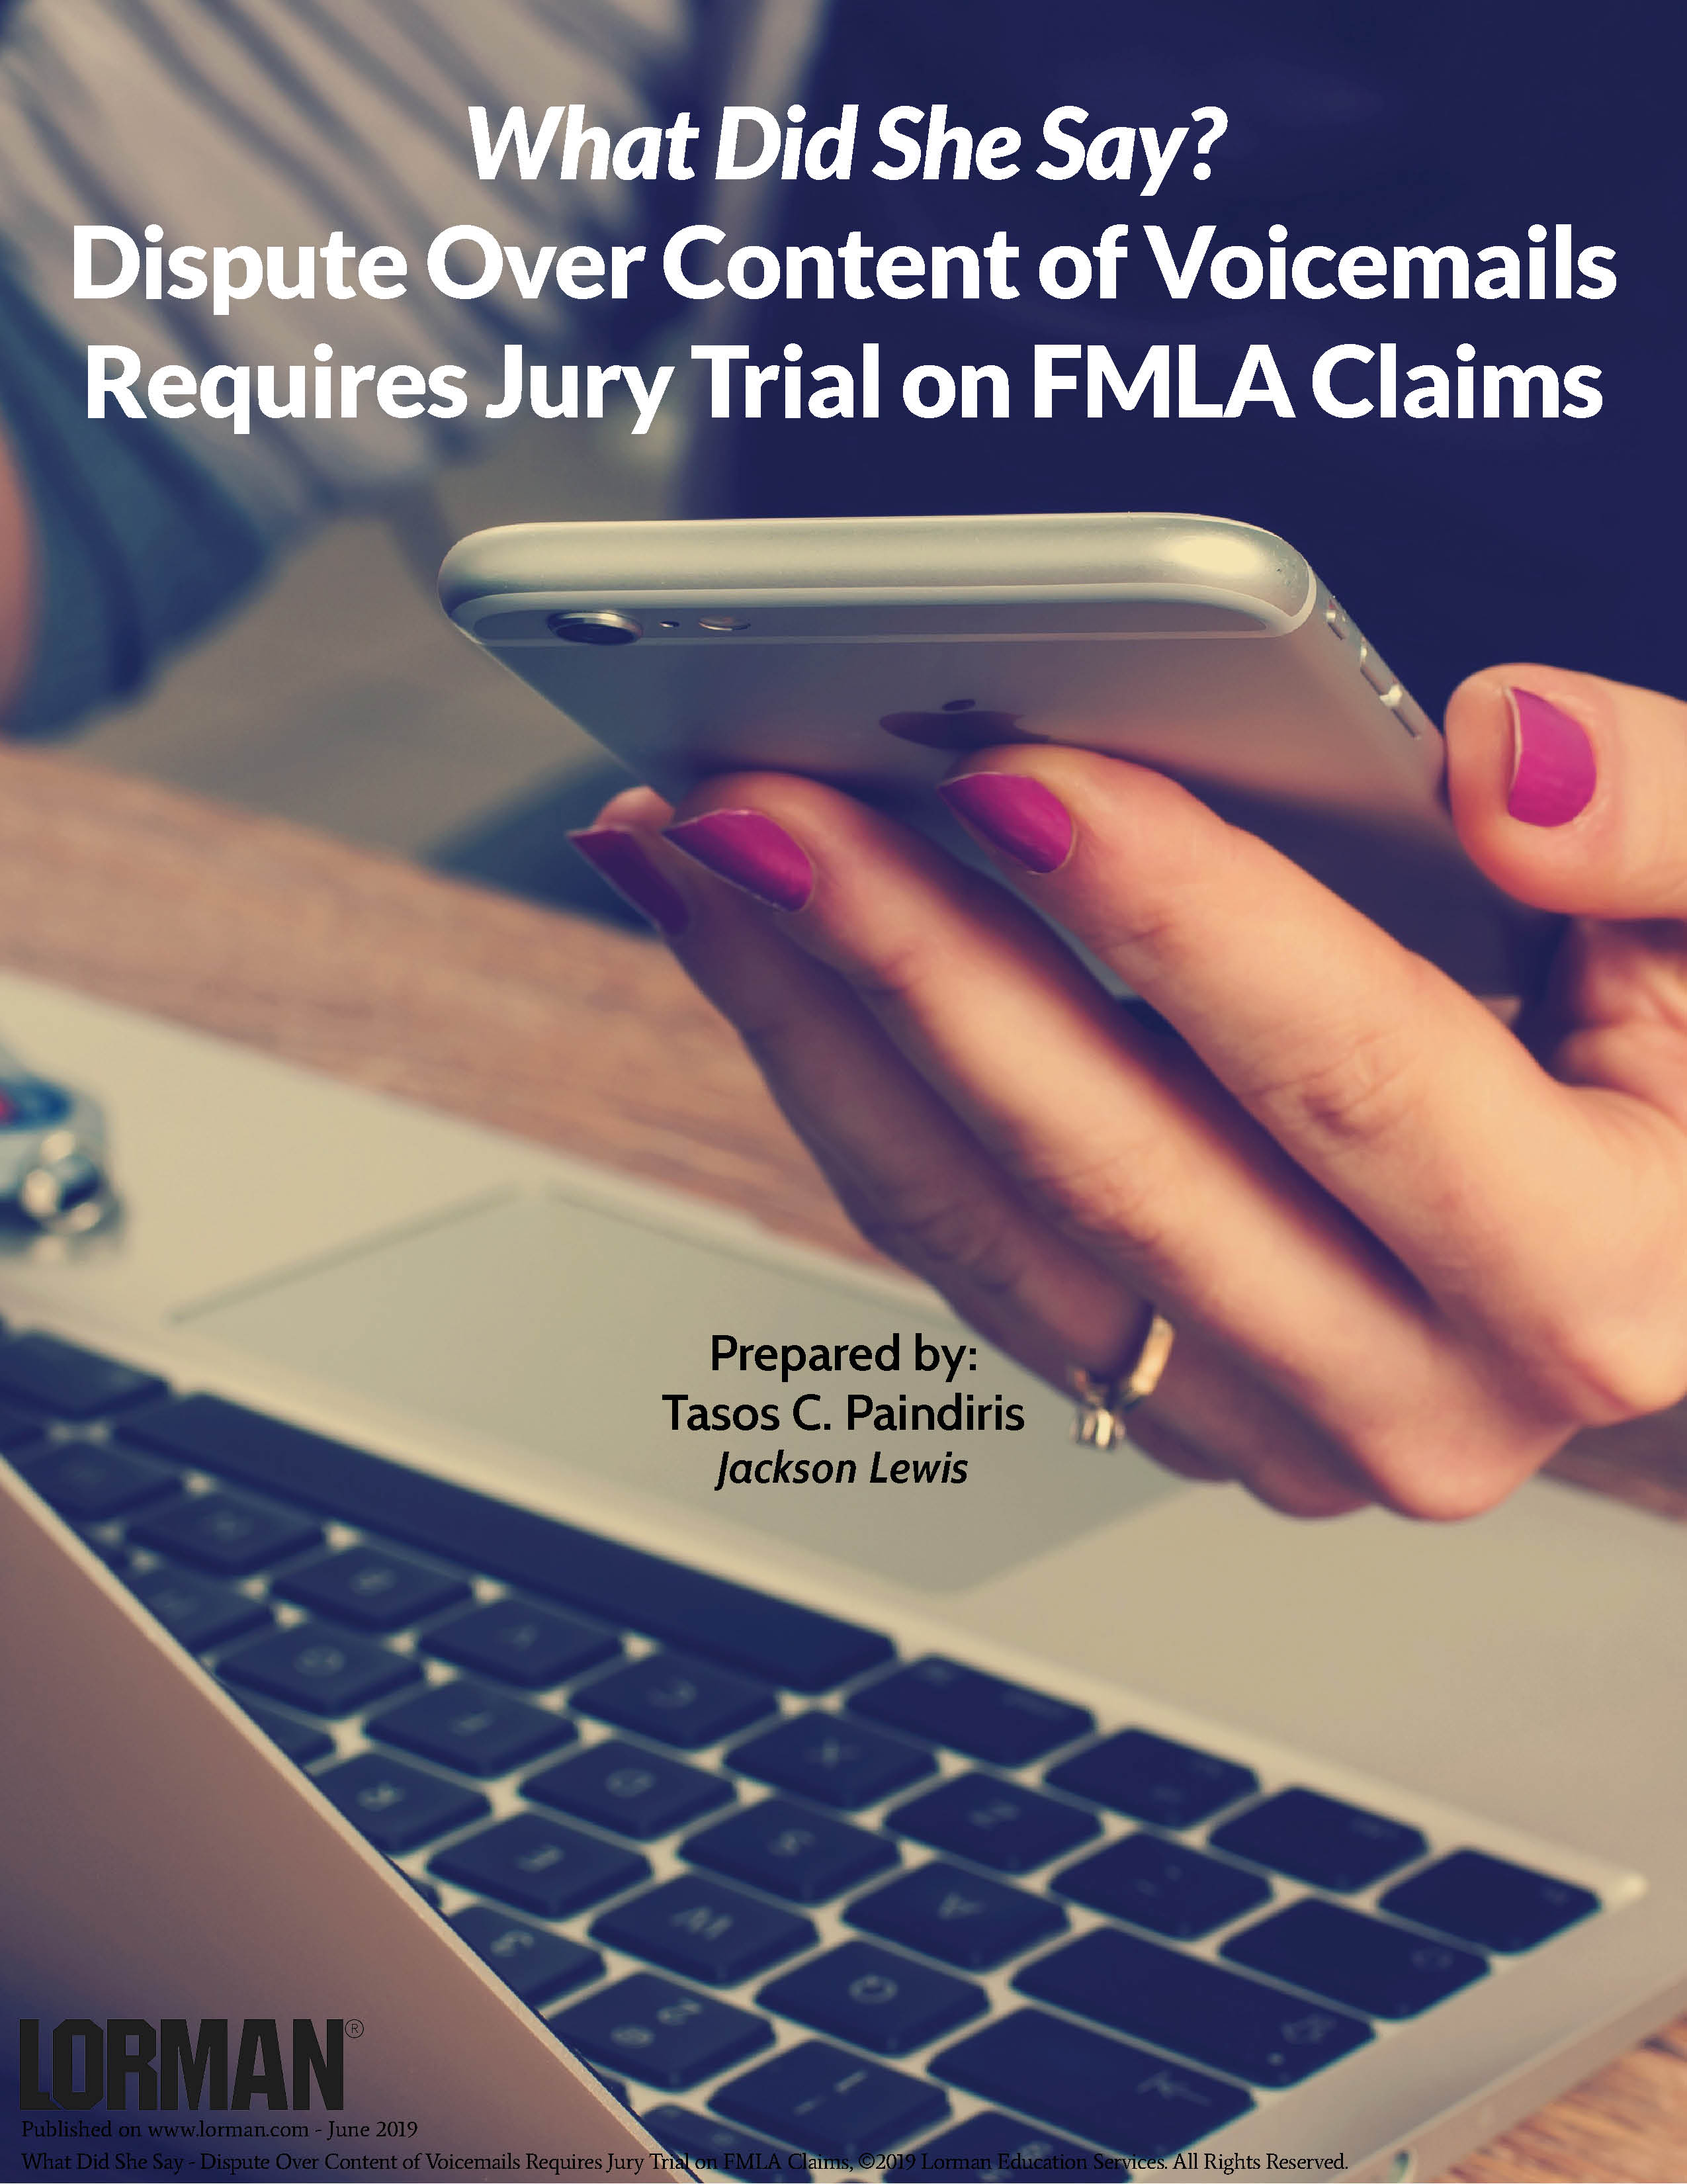 Dispute Over Content of Voicemails Requires Jury Trial on FMLA Claims